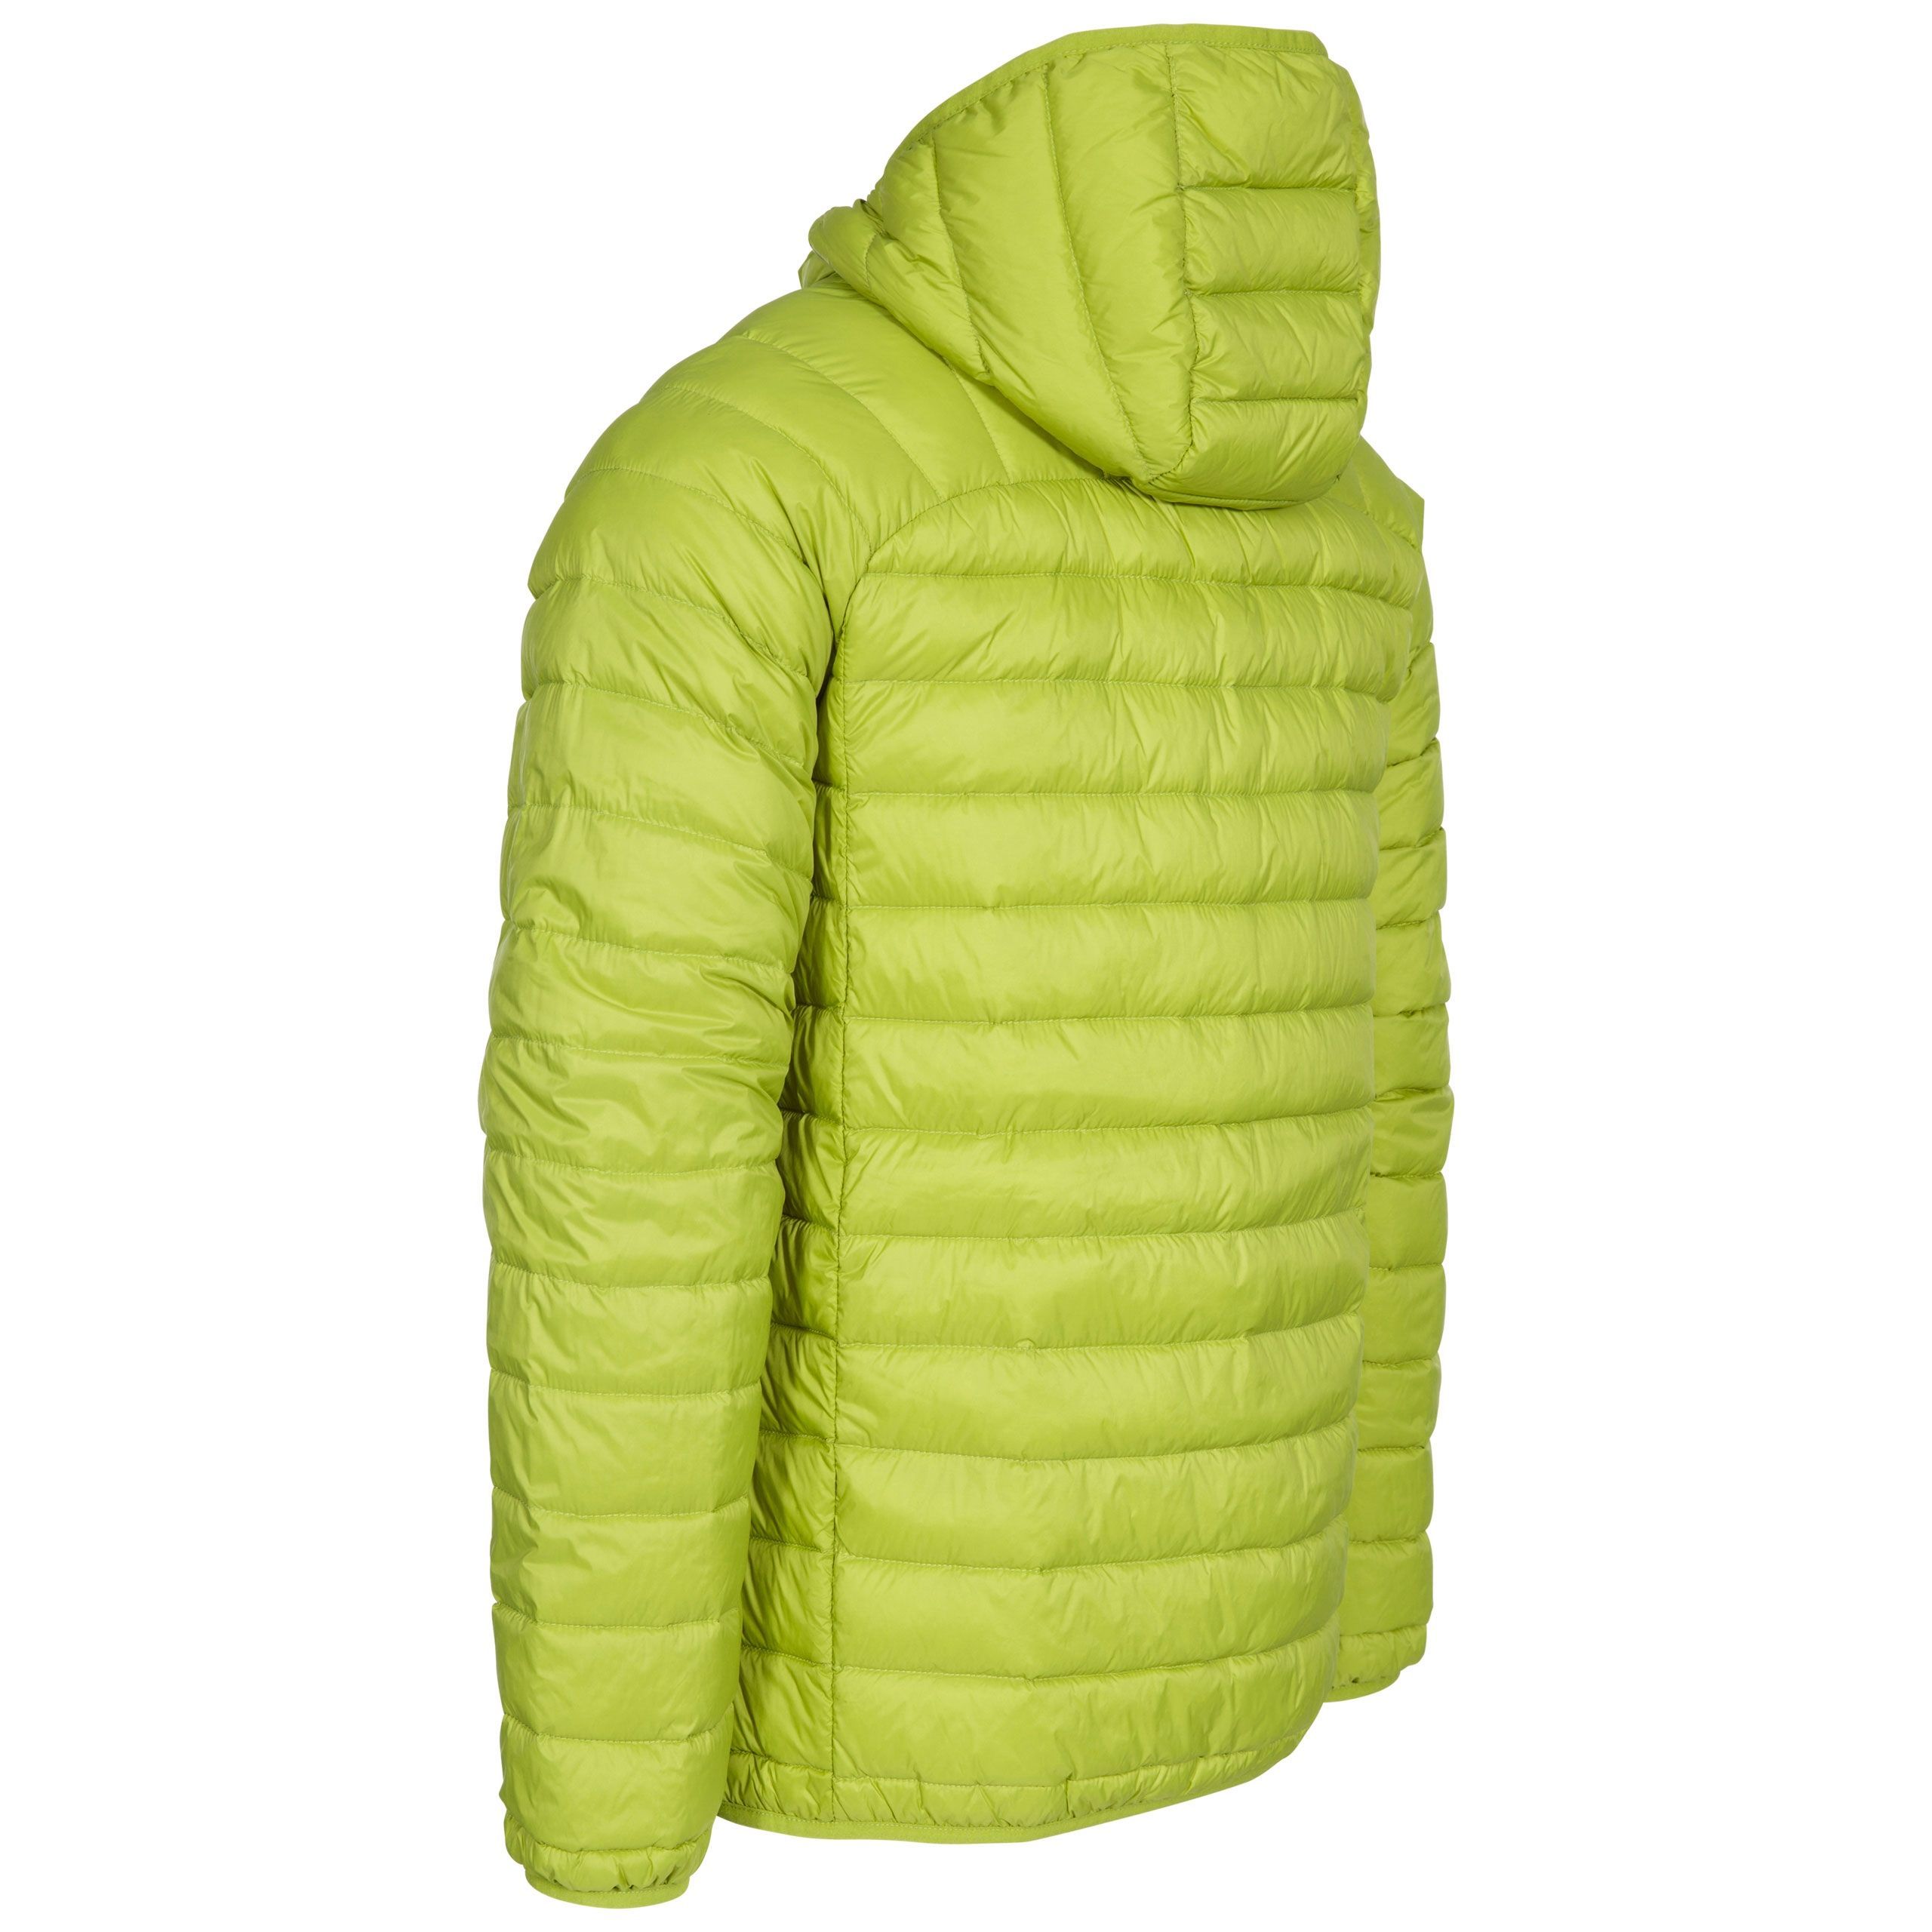 Padded down jacket with ultra-lightweight design and grown-on hood. Low profile front zip. Stuff sack in pocket. Stuffing: 90% down, 10% feathers. Trespass Mens Chest Sizing (approx): S - 35-37in/89-94cm, M - 38-40in/96.5-101.5cm, L - 41-43in/104-109cm, XL - 44-46in/111.5-117cm, XXL - 46-48in/117-122cm, 3XL - 48-50in/122-127cm.